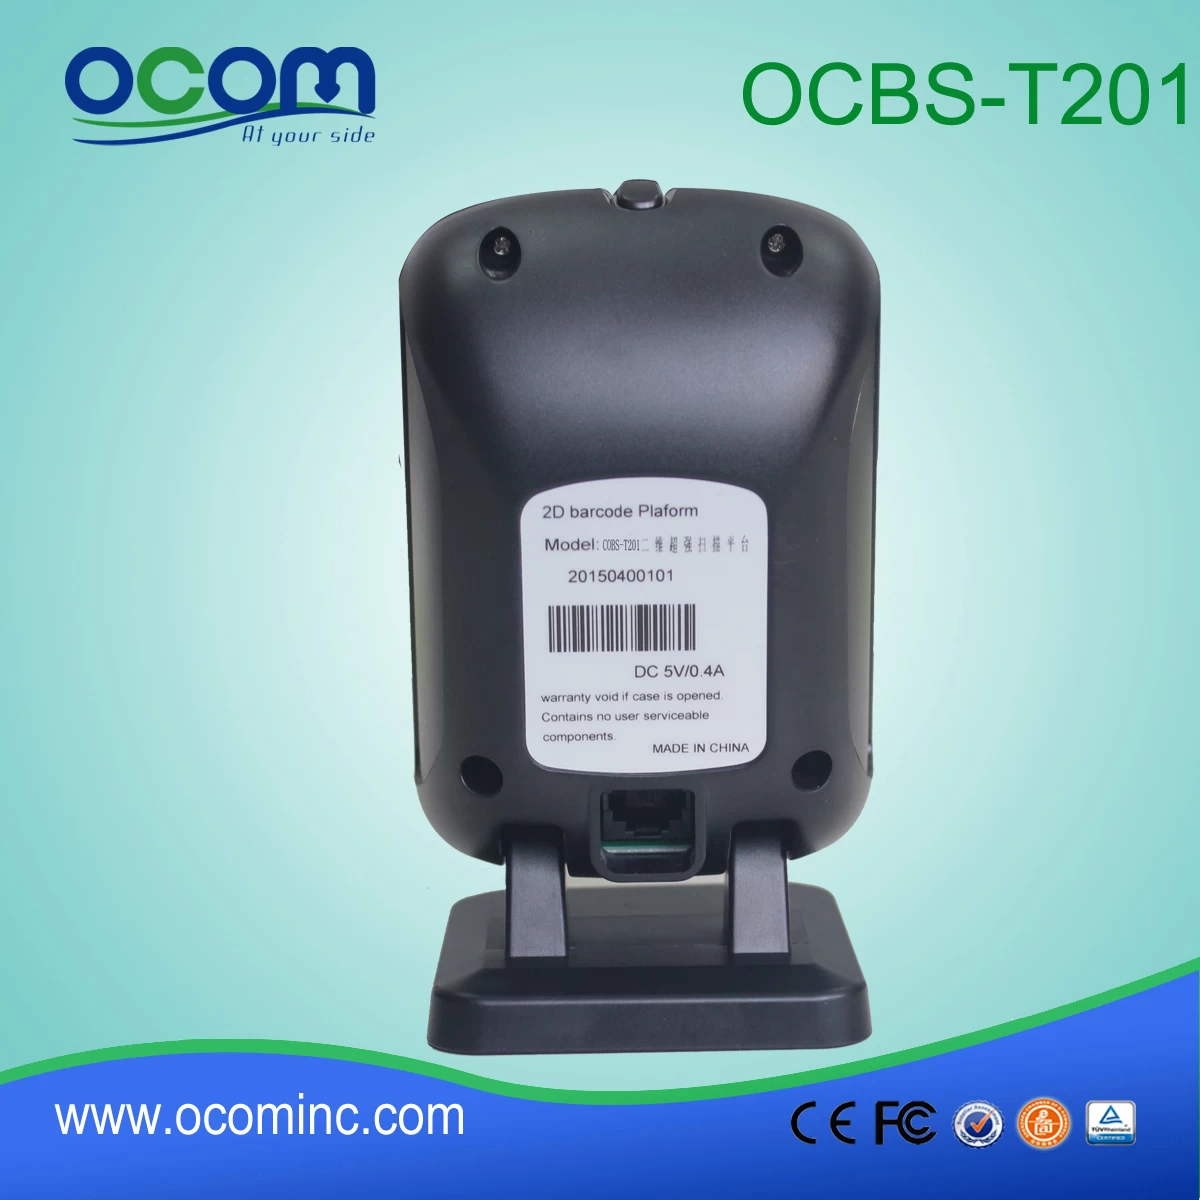 table top barcode scanner/reader (OCBS-T201)